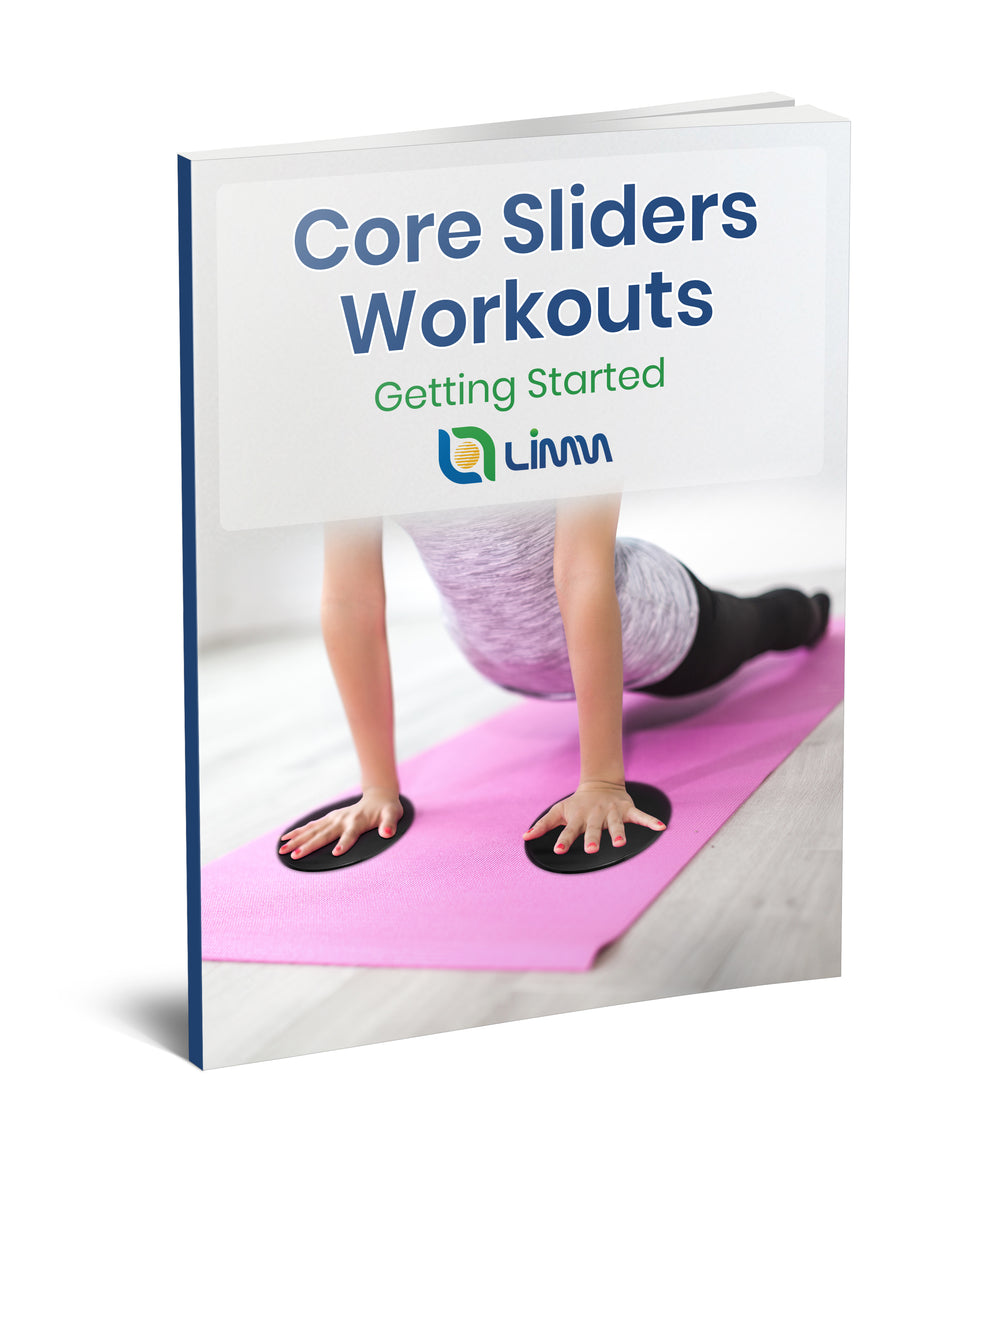 Core Sliders Workouts: 24 Exercises Ideas with Description and Illustrations